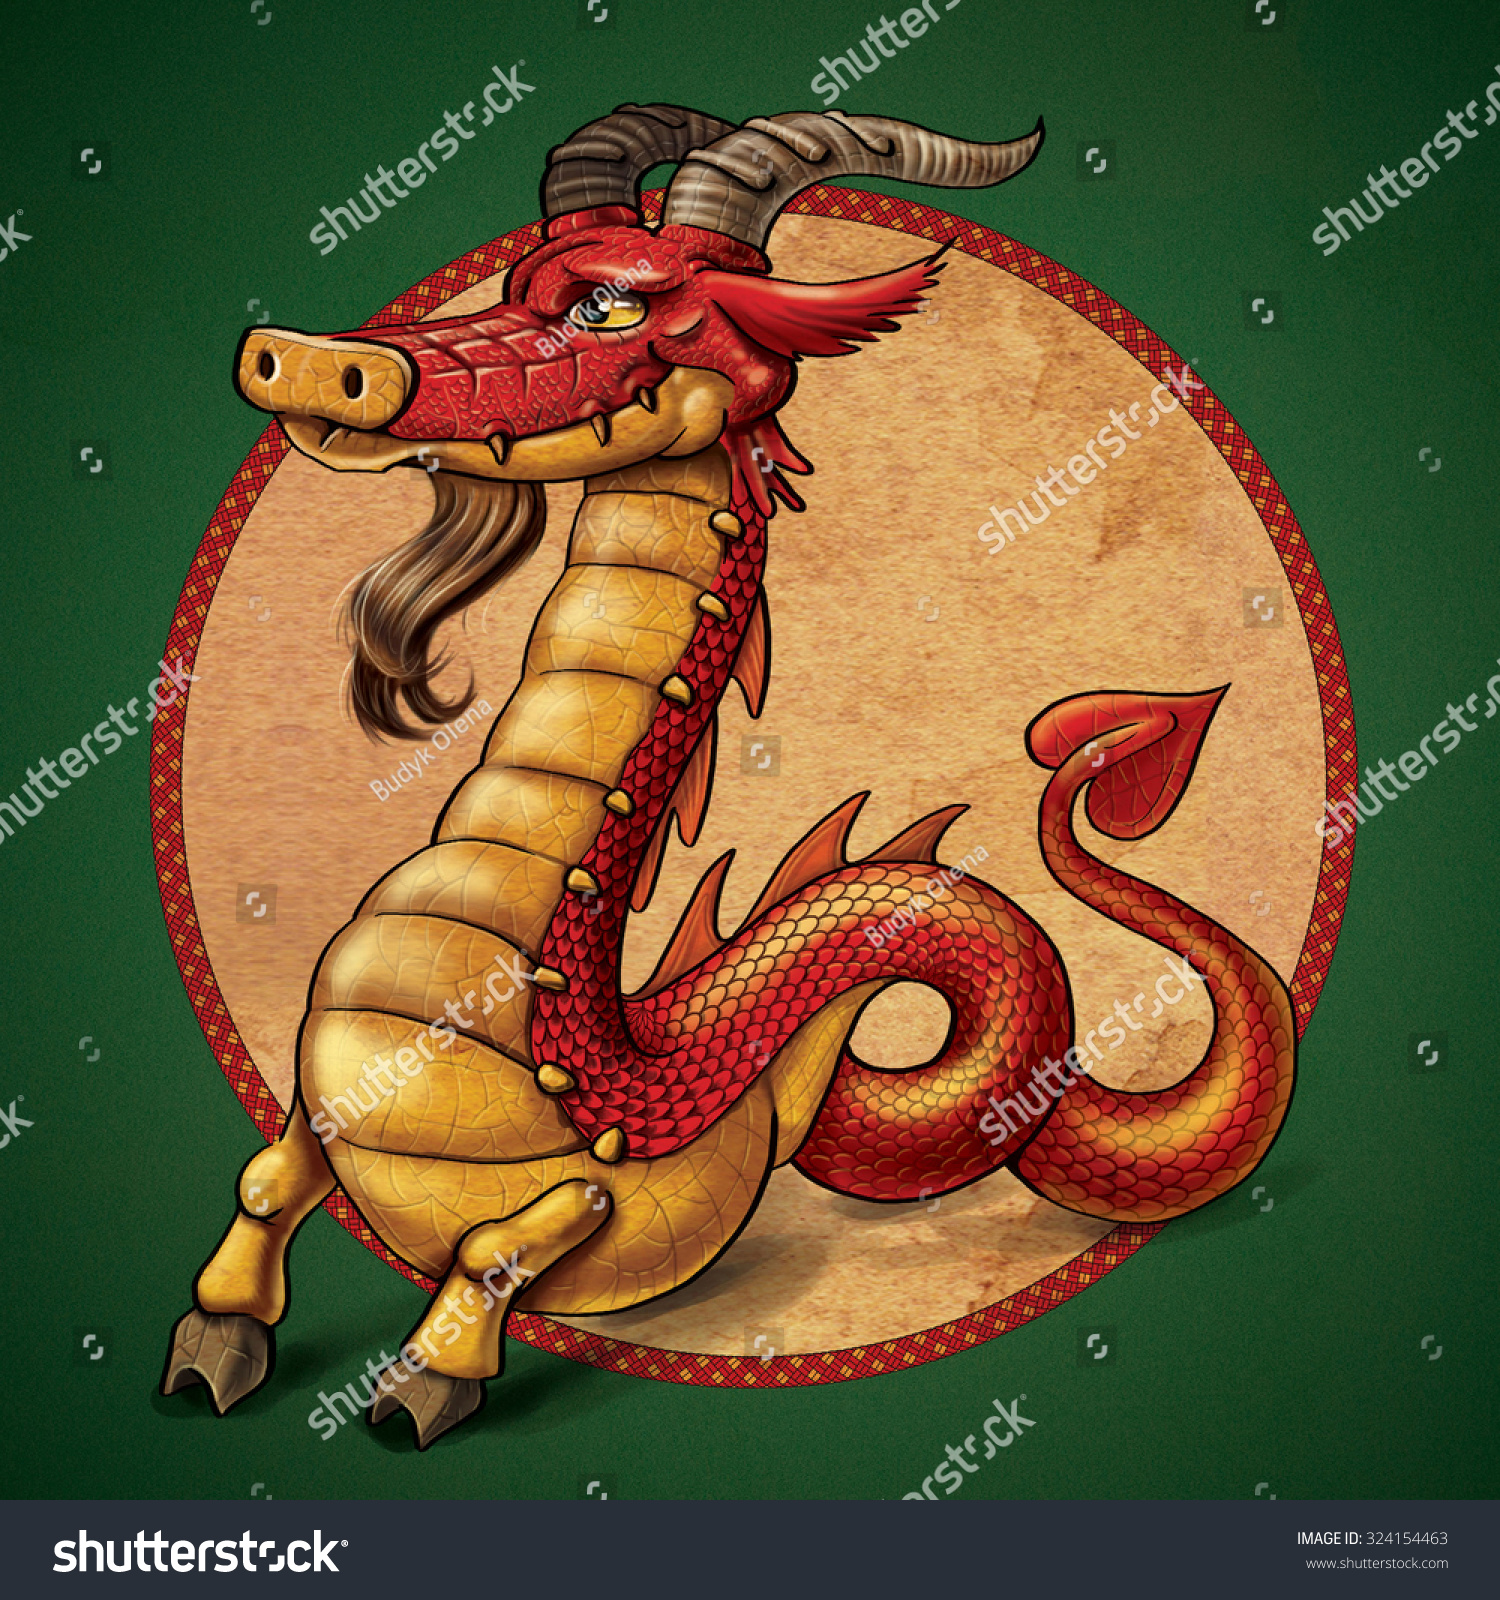 Picture Of Cartoon Horned Red Dragon Stock Photo 324154463 : Shutterstock